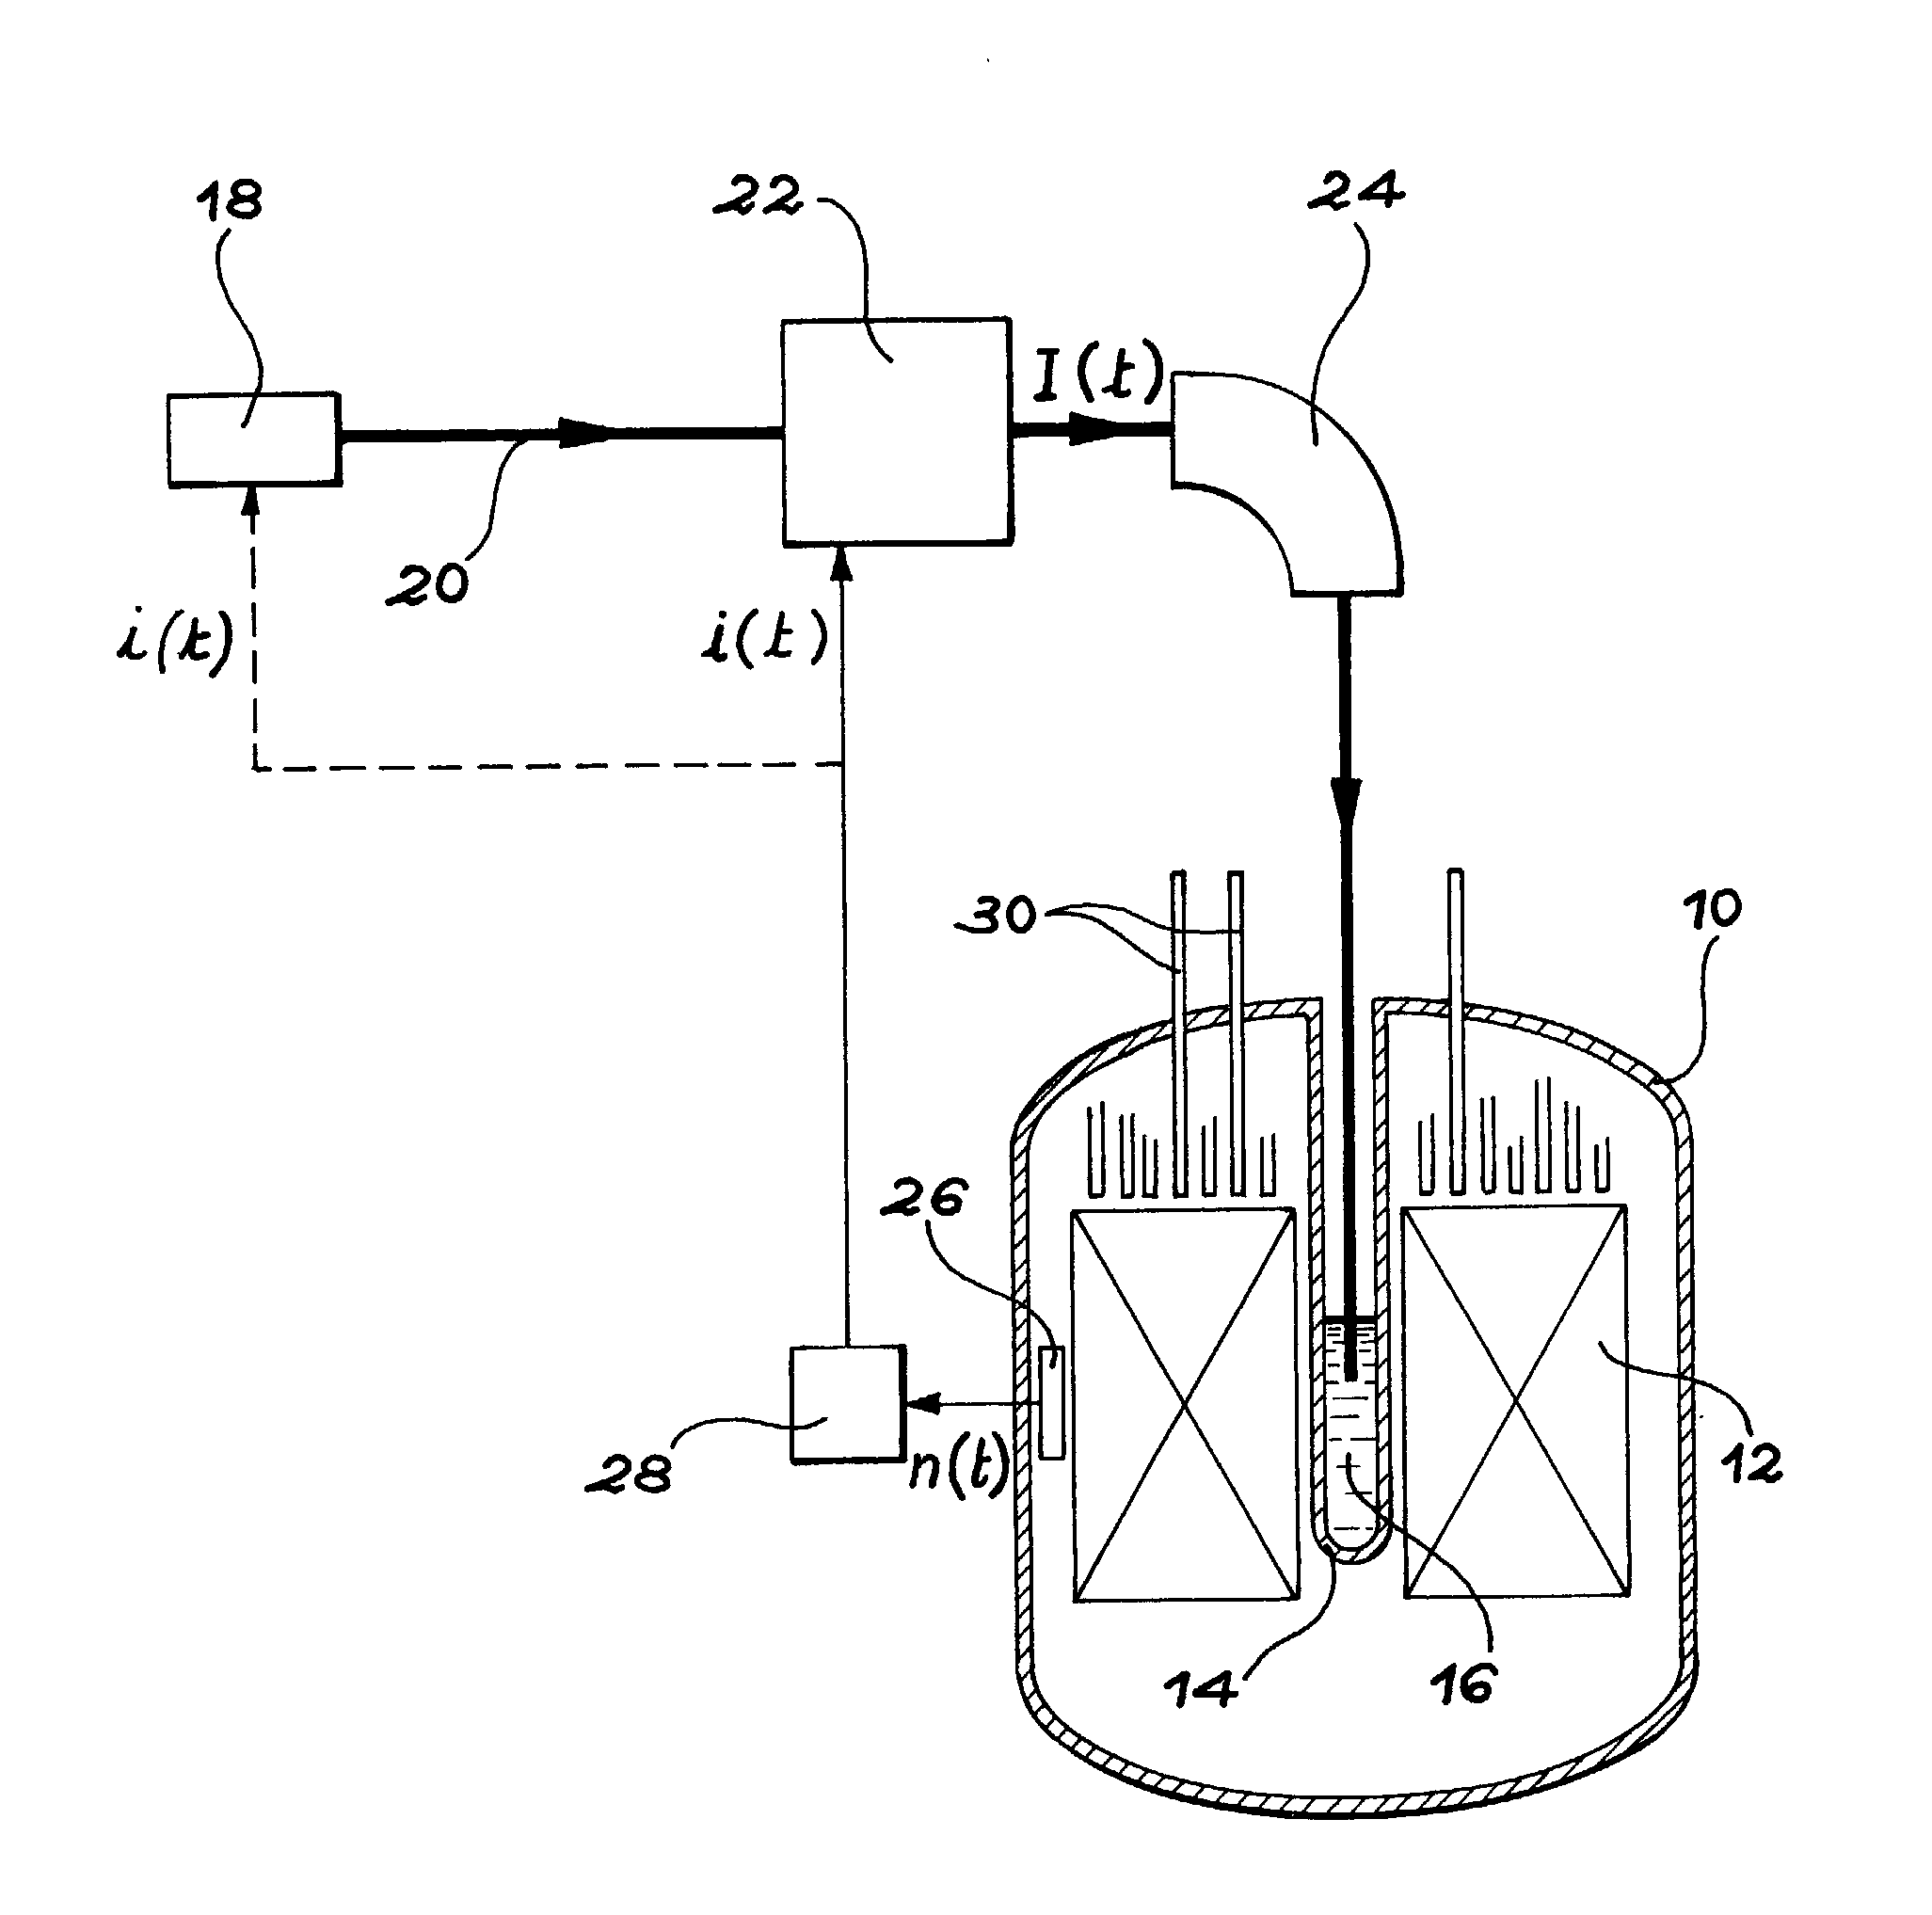 Method for incinerating transuranian chemical elements and nuclear reactor using same